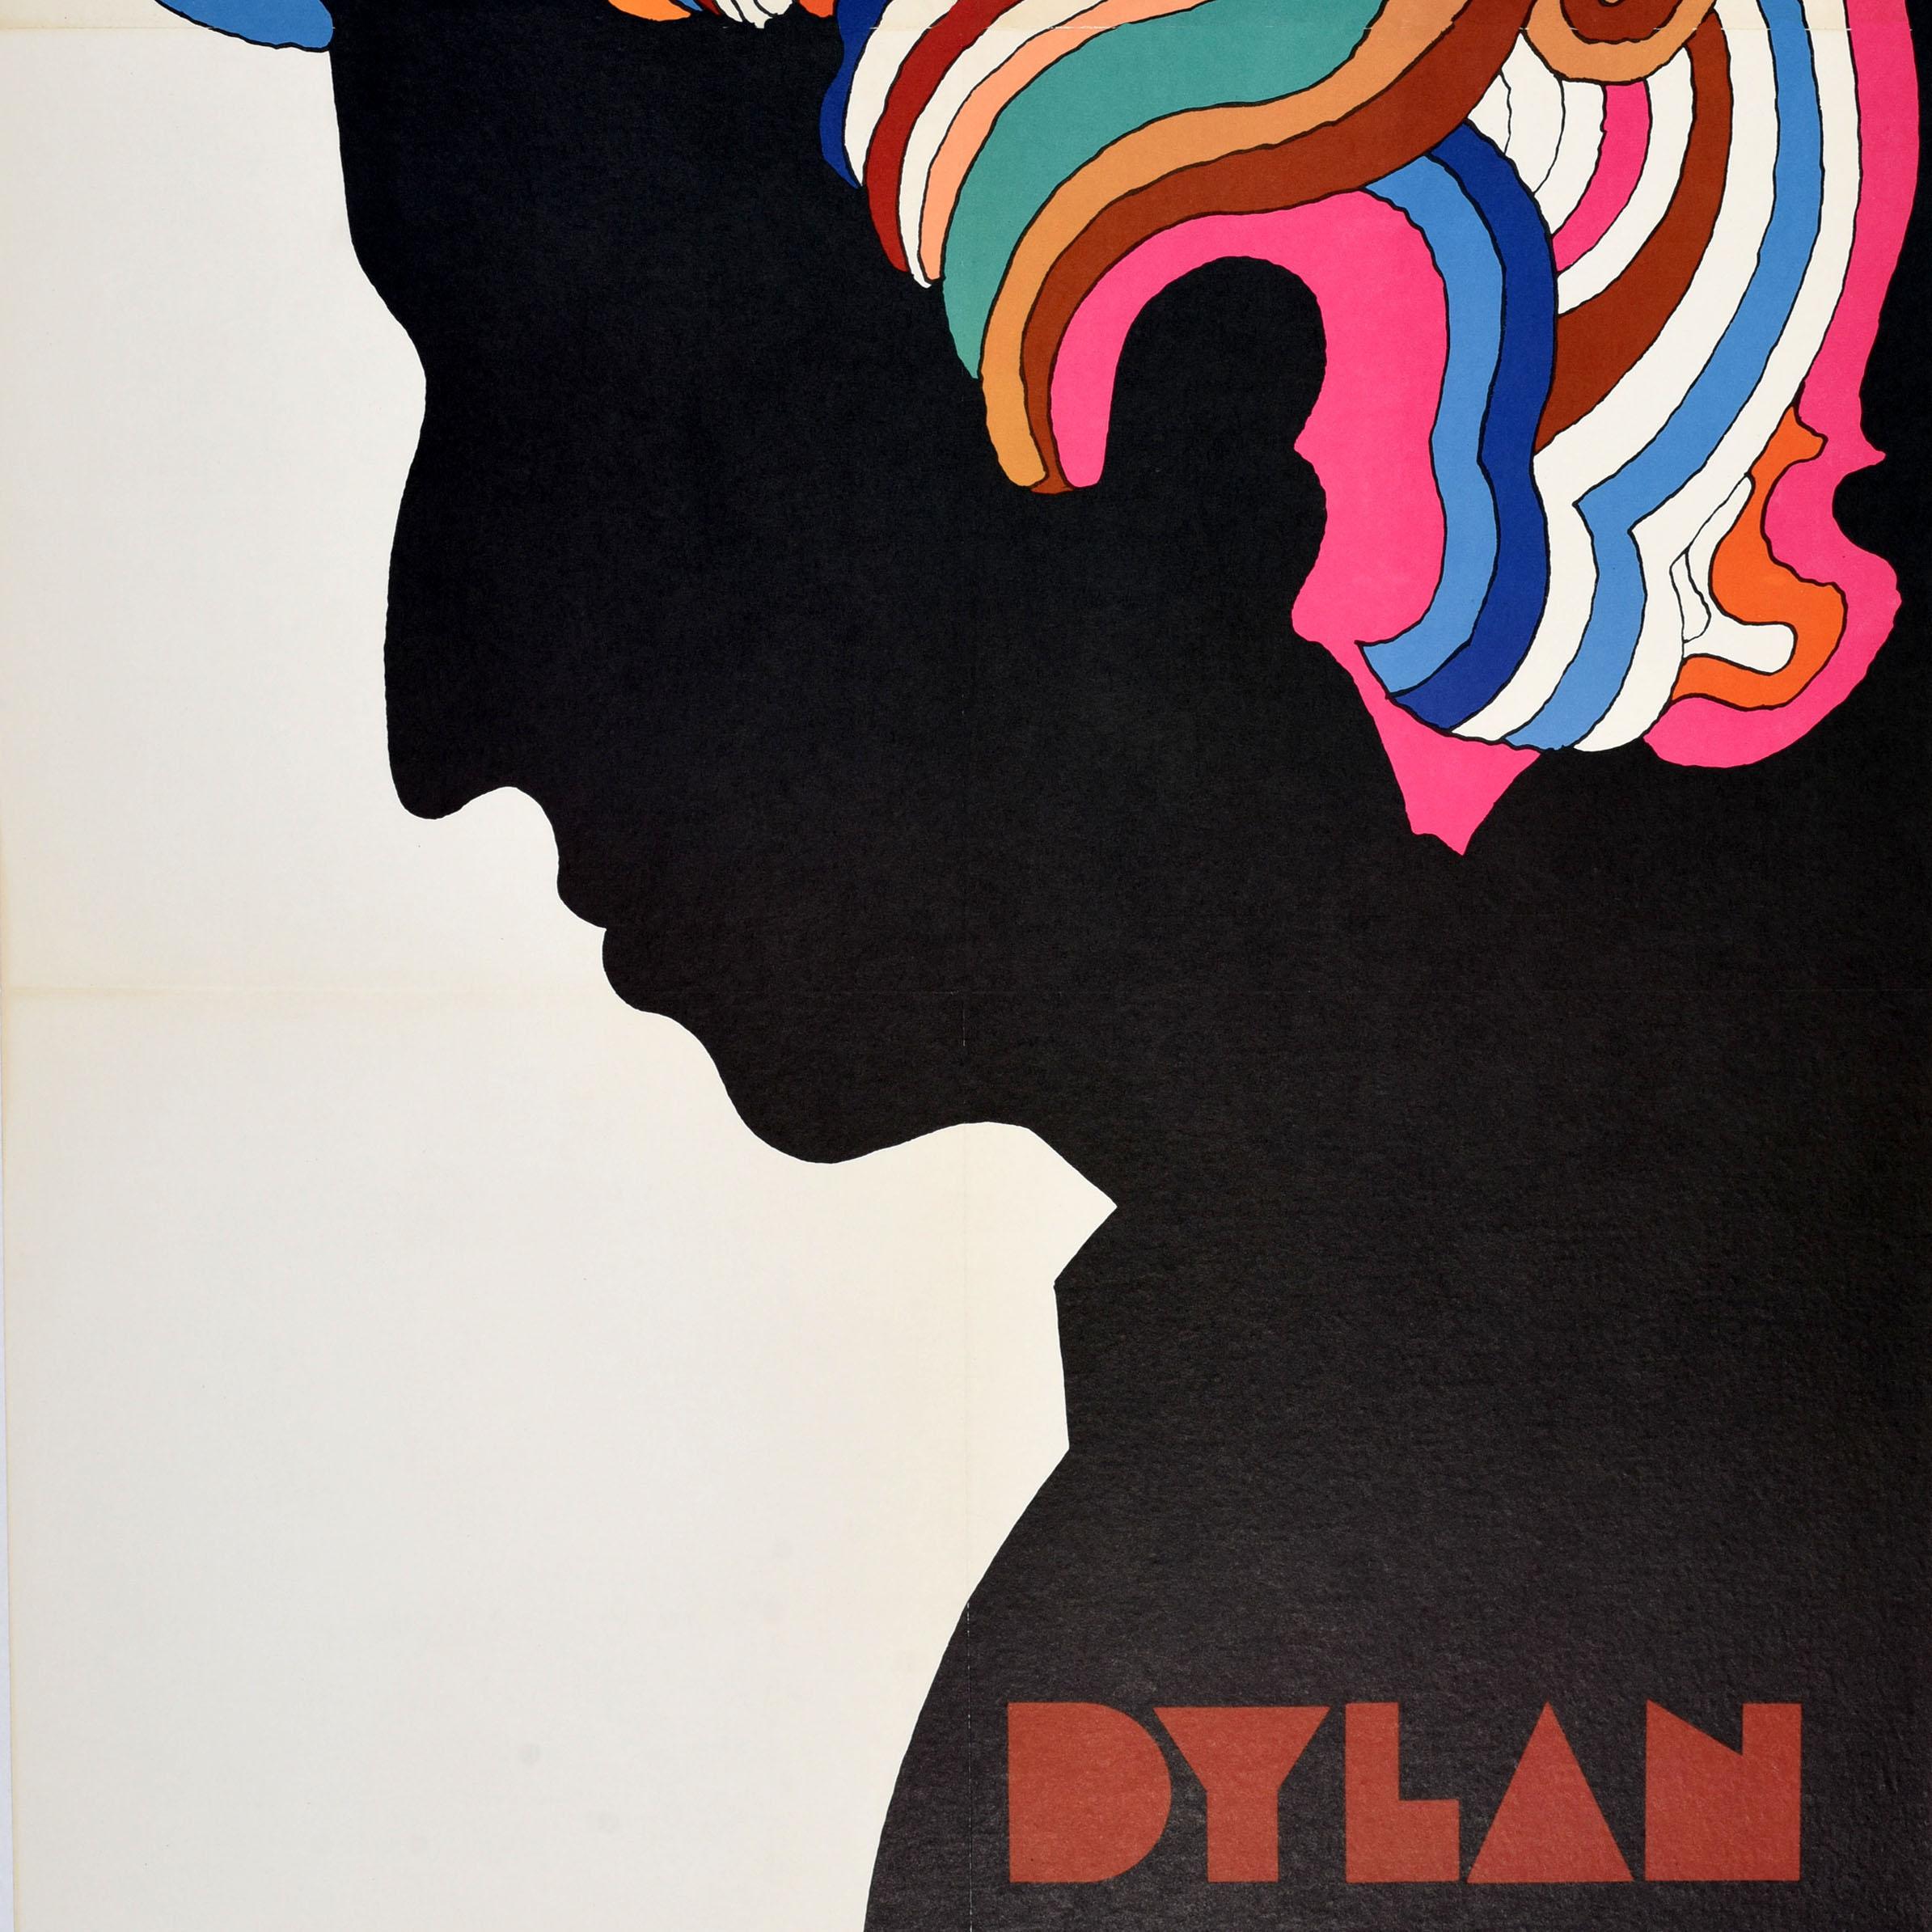 Original vintage music poster from the sixties psychedelic era featuring an iconic image of the influential musician Bob Dylan (Robert Allen Zimmerman; b 1941). This colourful design depicting Dylan's profile with swirling hair by the notable